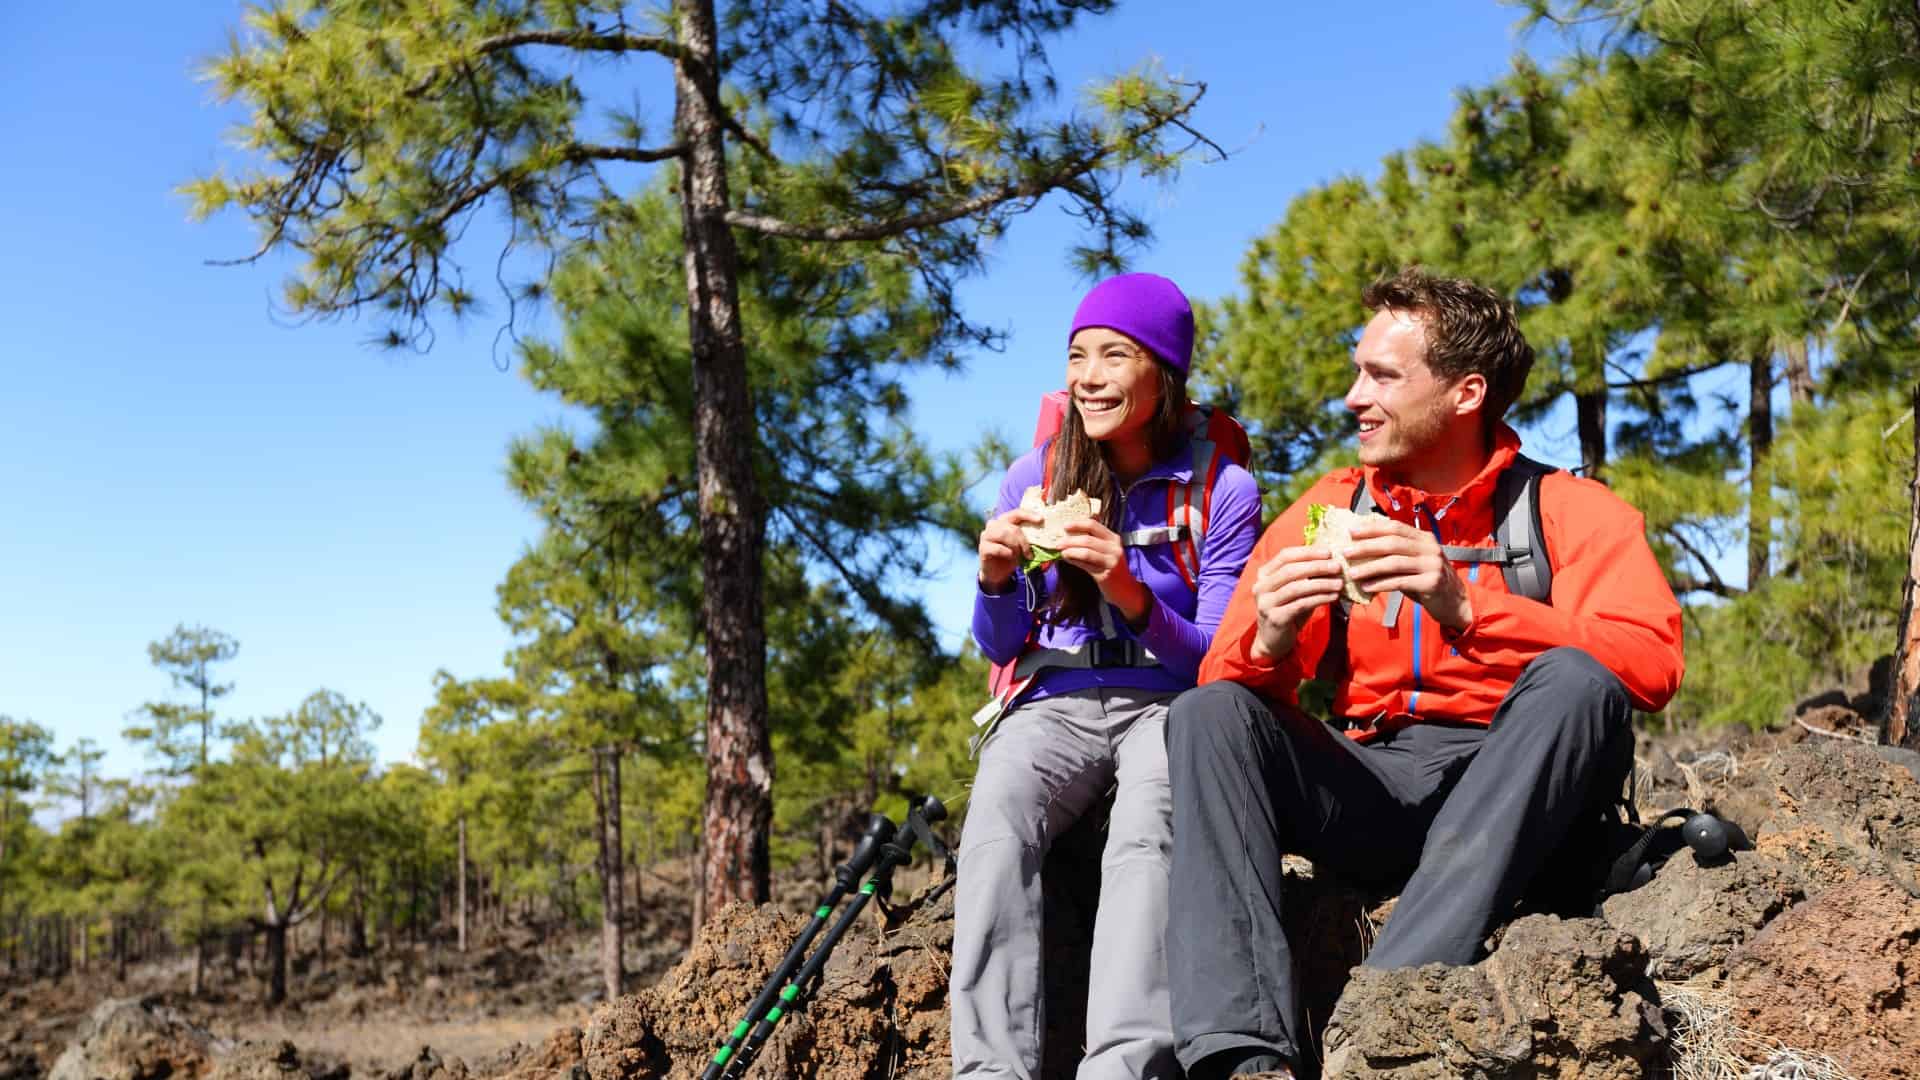 Hikers eating sandwiches